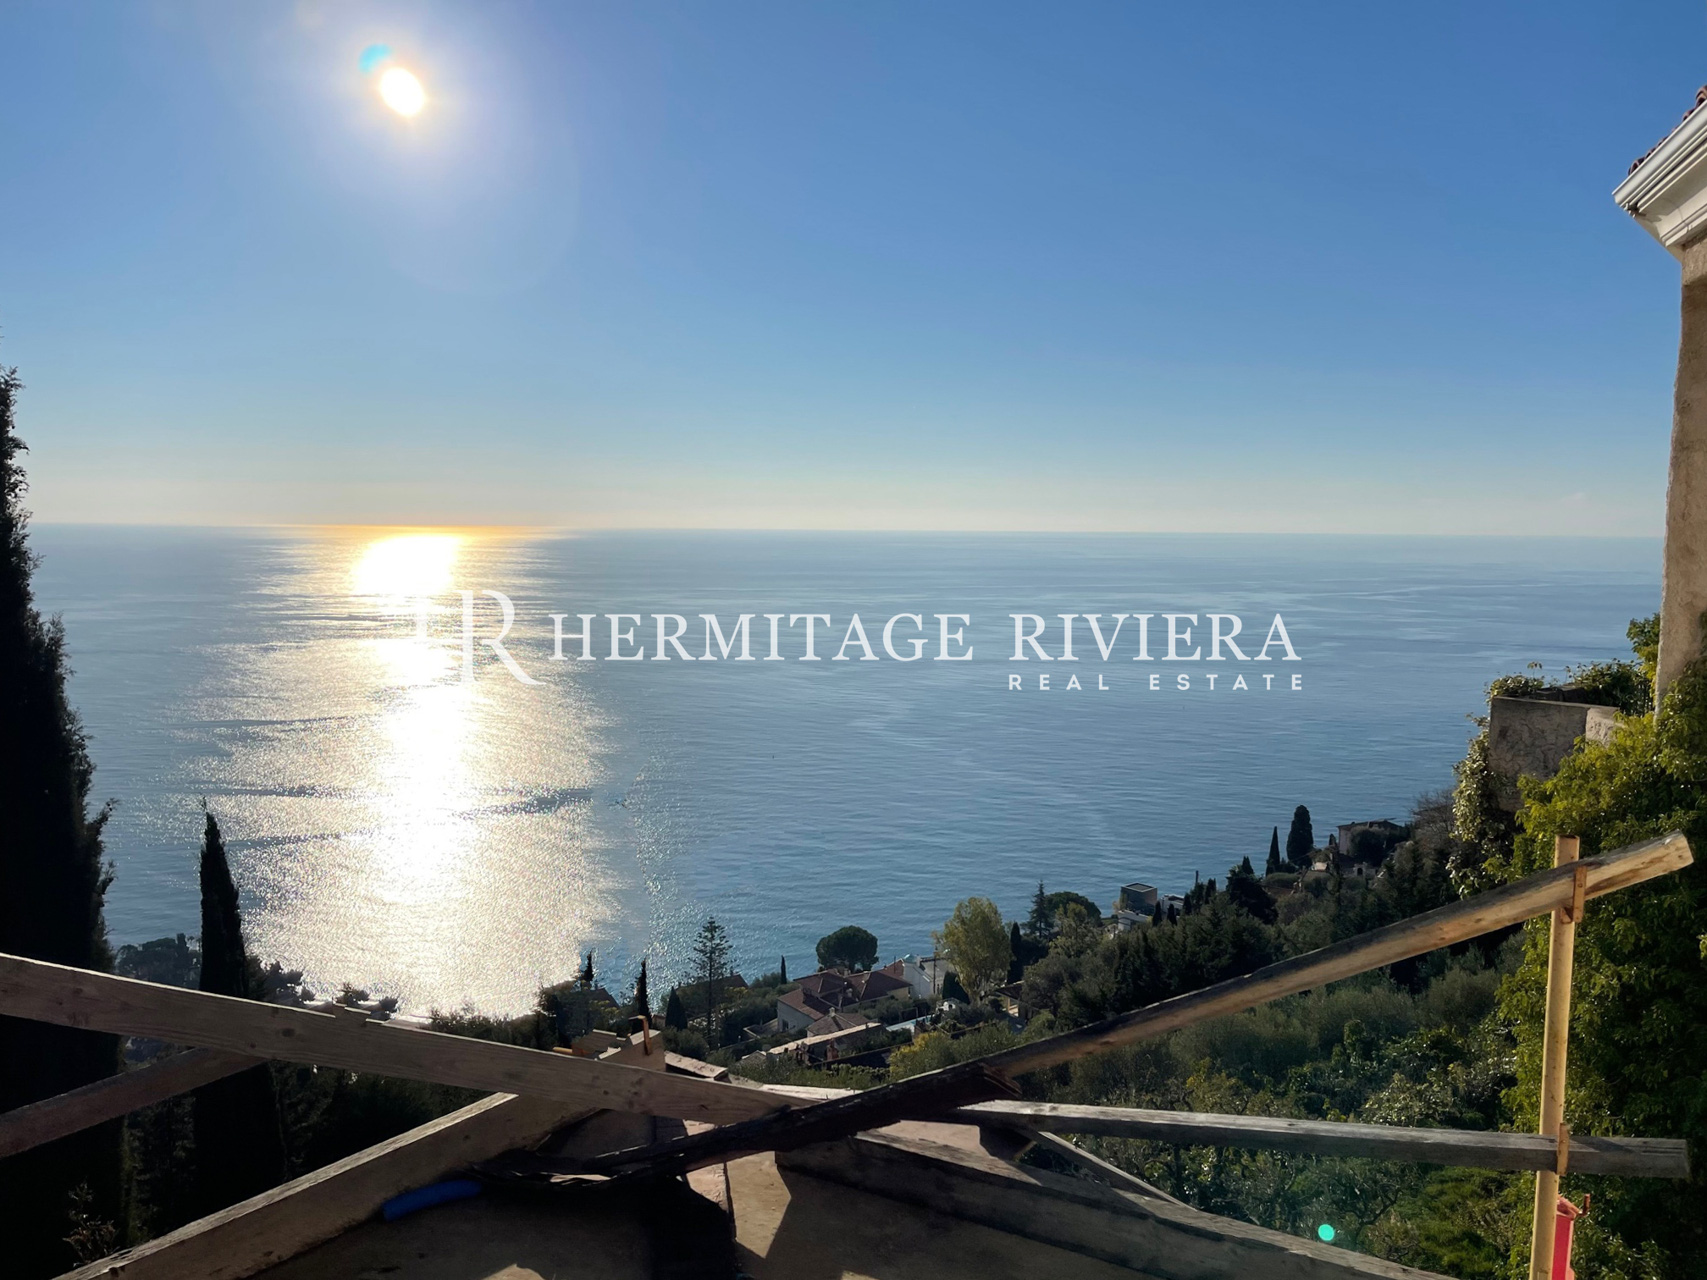 Property close Monaco with panoramic view  (image 4)